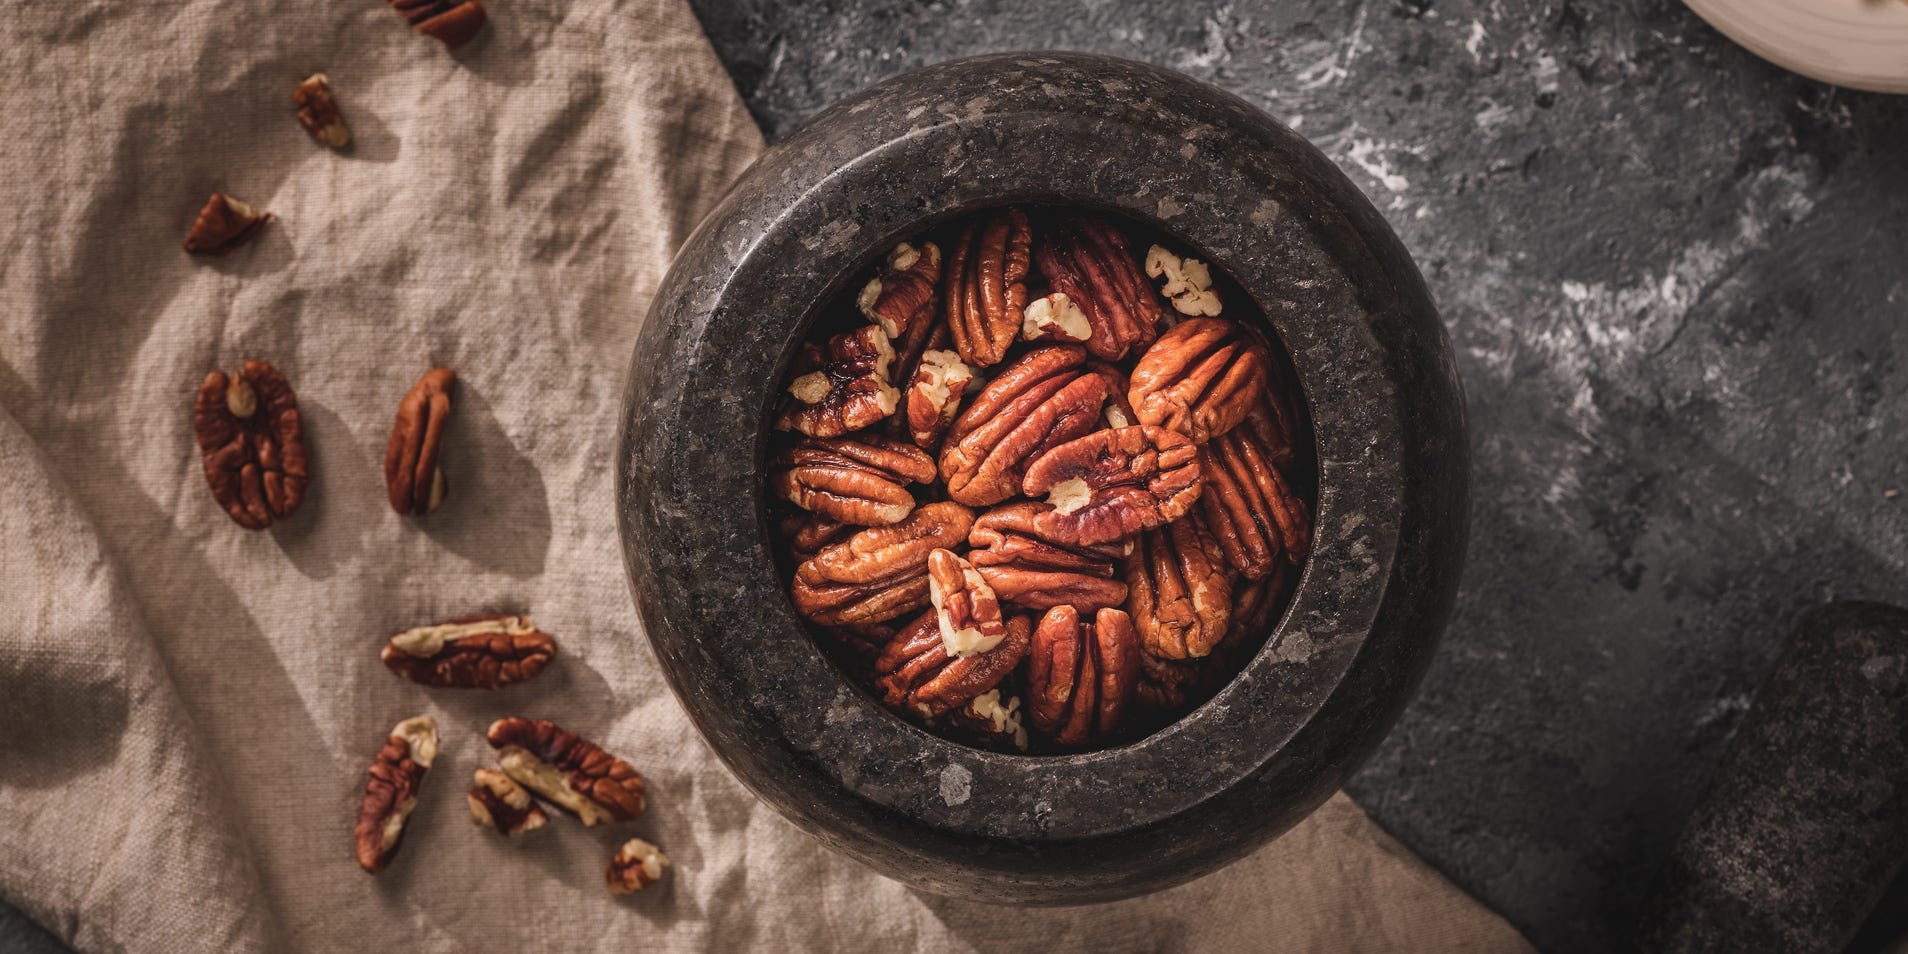 Toasted pecans in a mortar and pestle with some light styling in the background